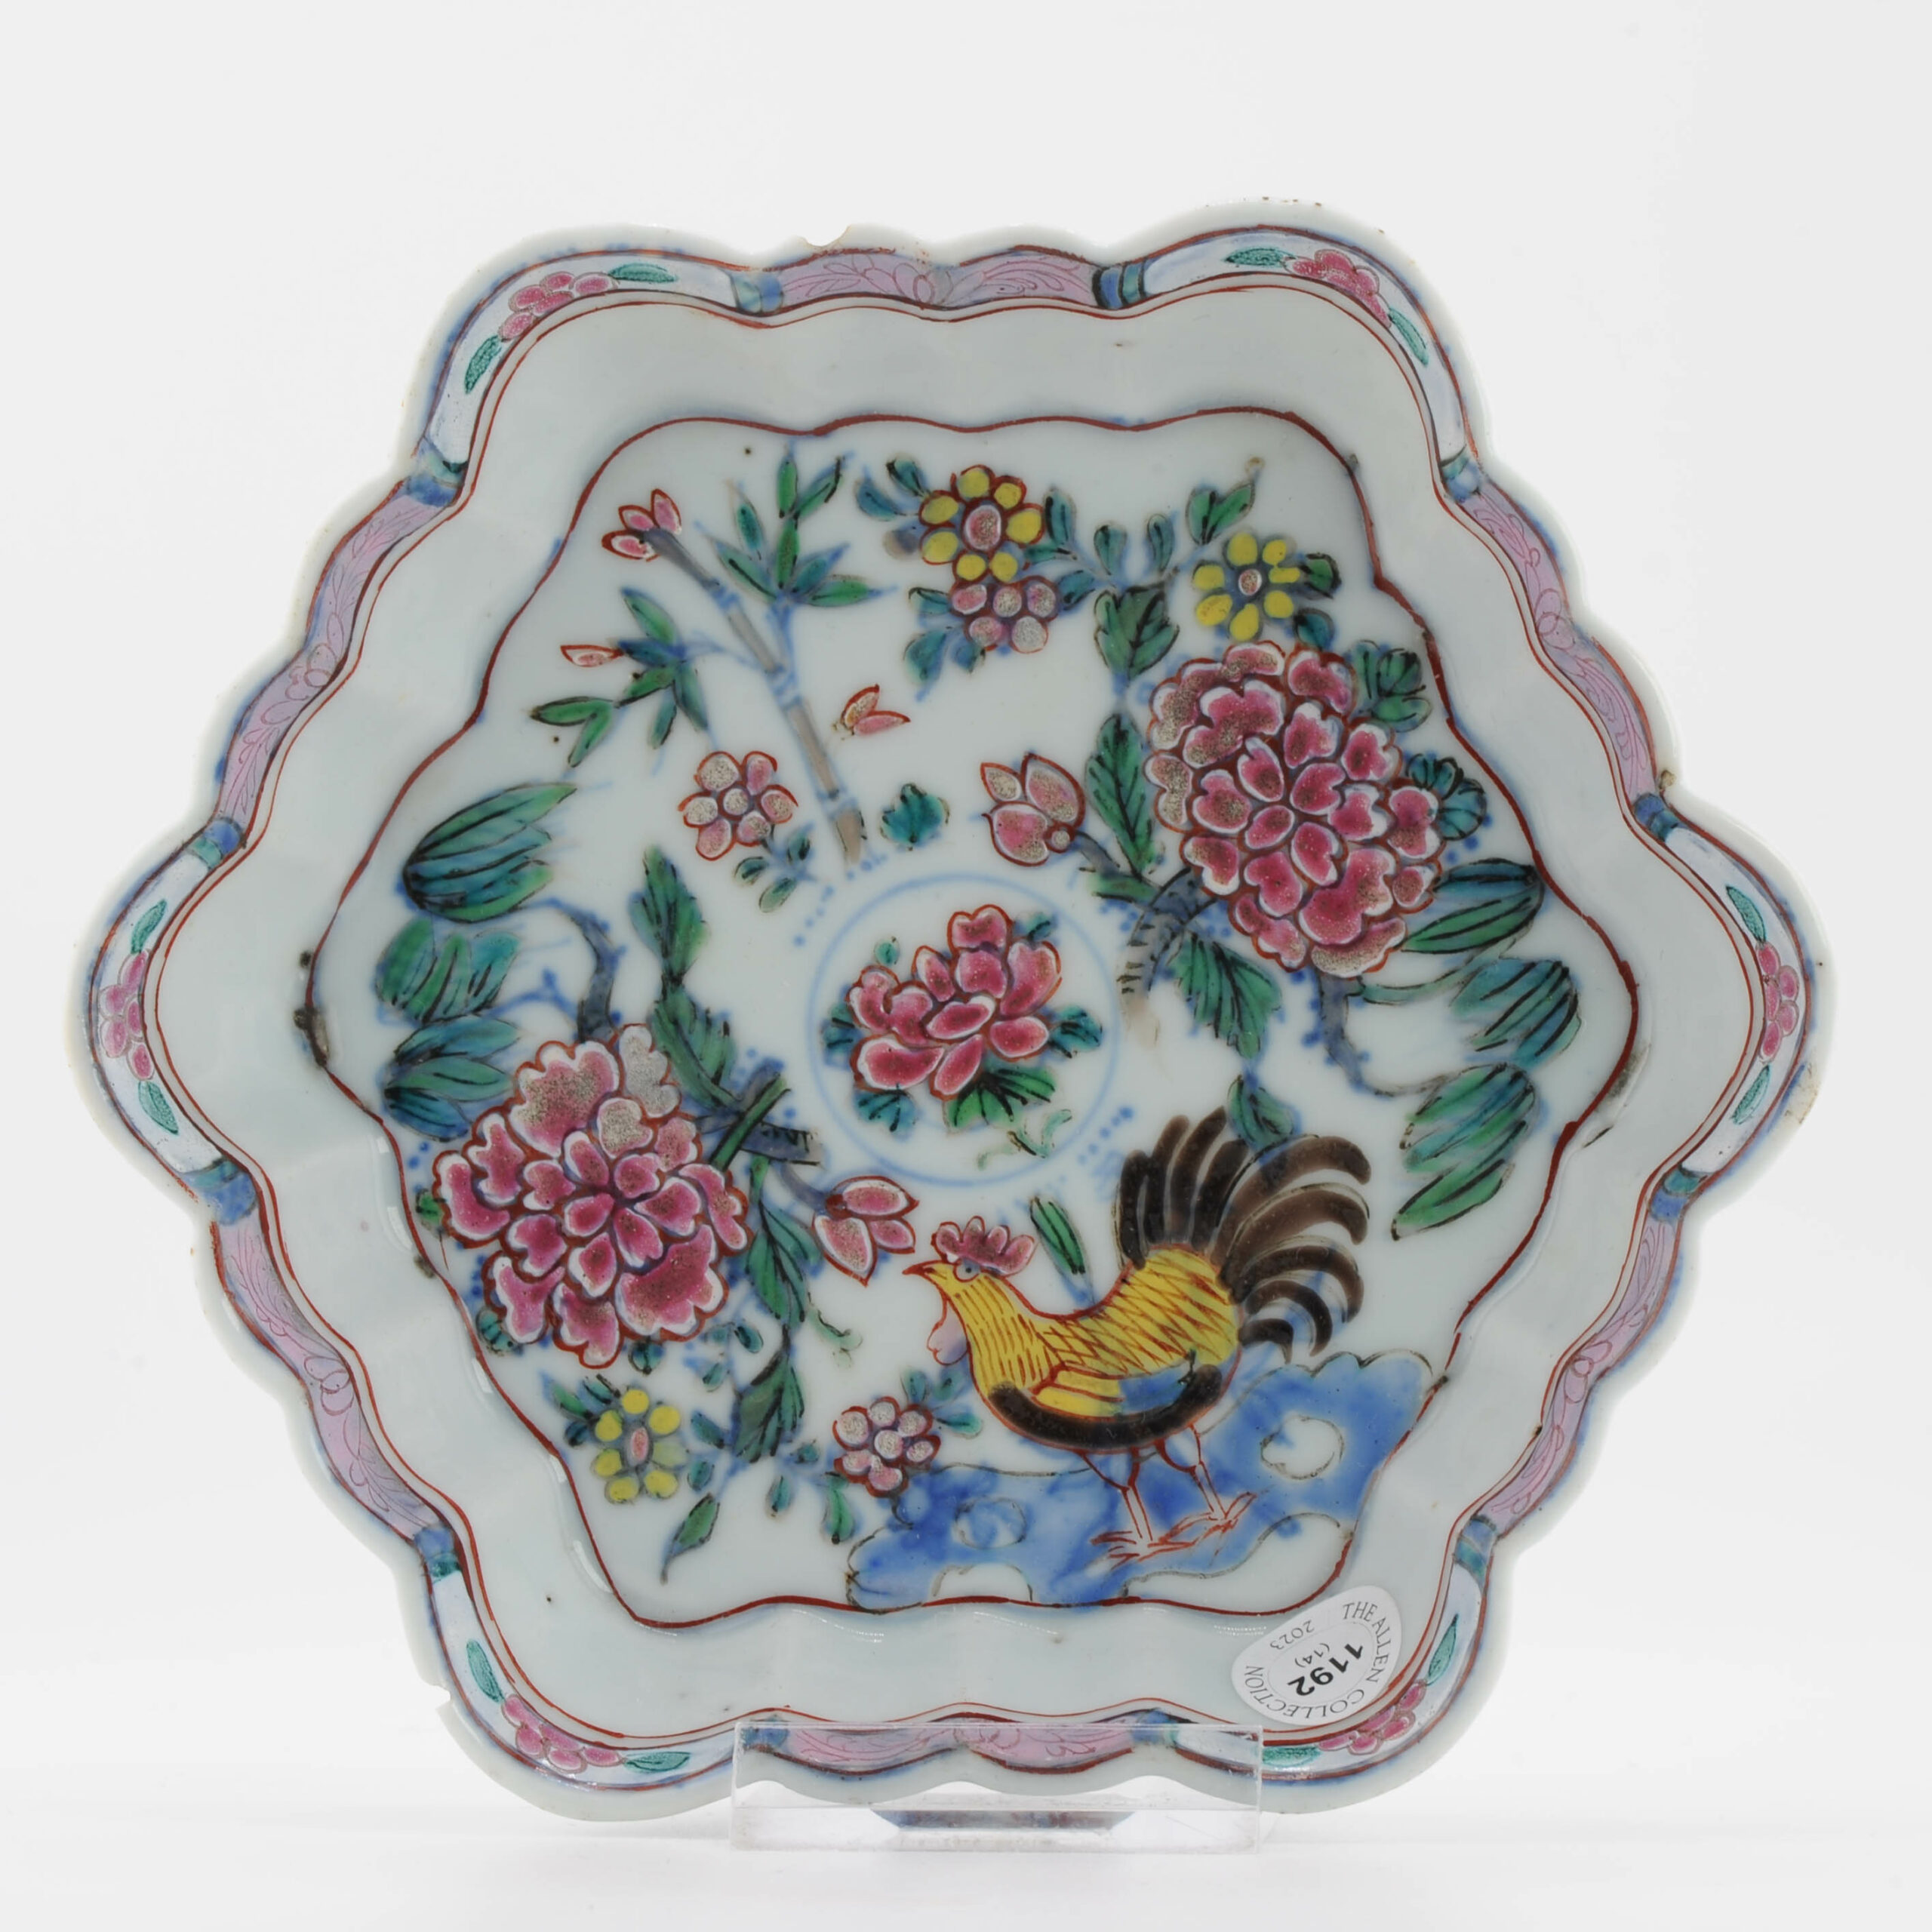 1352 Antique Chinese 1730-1740 Pattipan. Redecorated in the Europe in Doucai Fencai Style